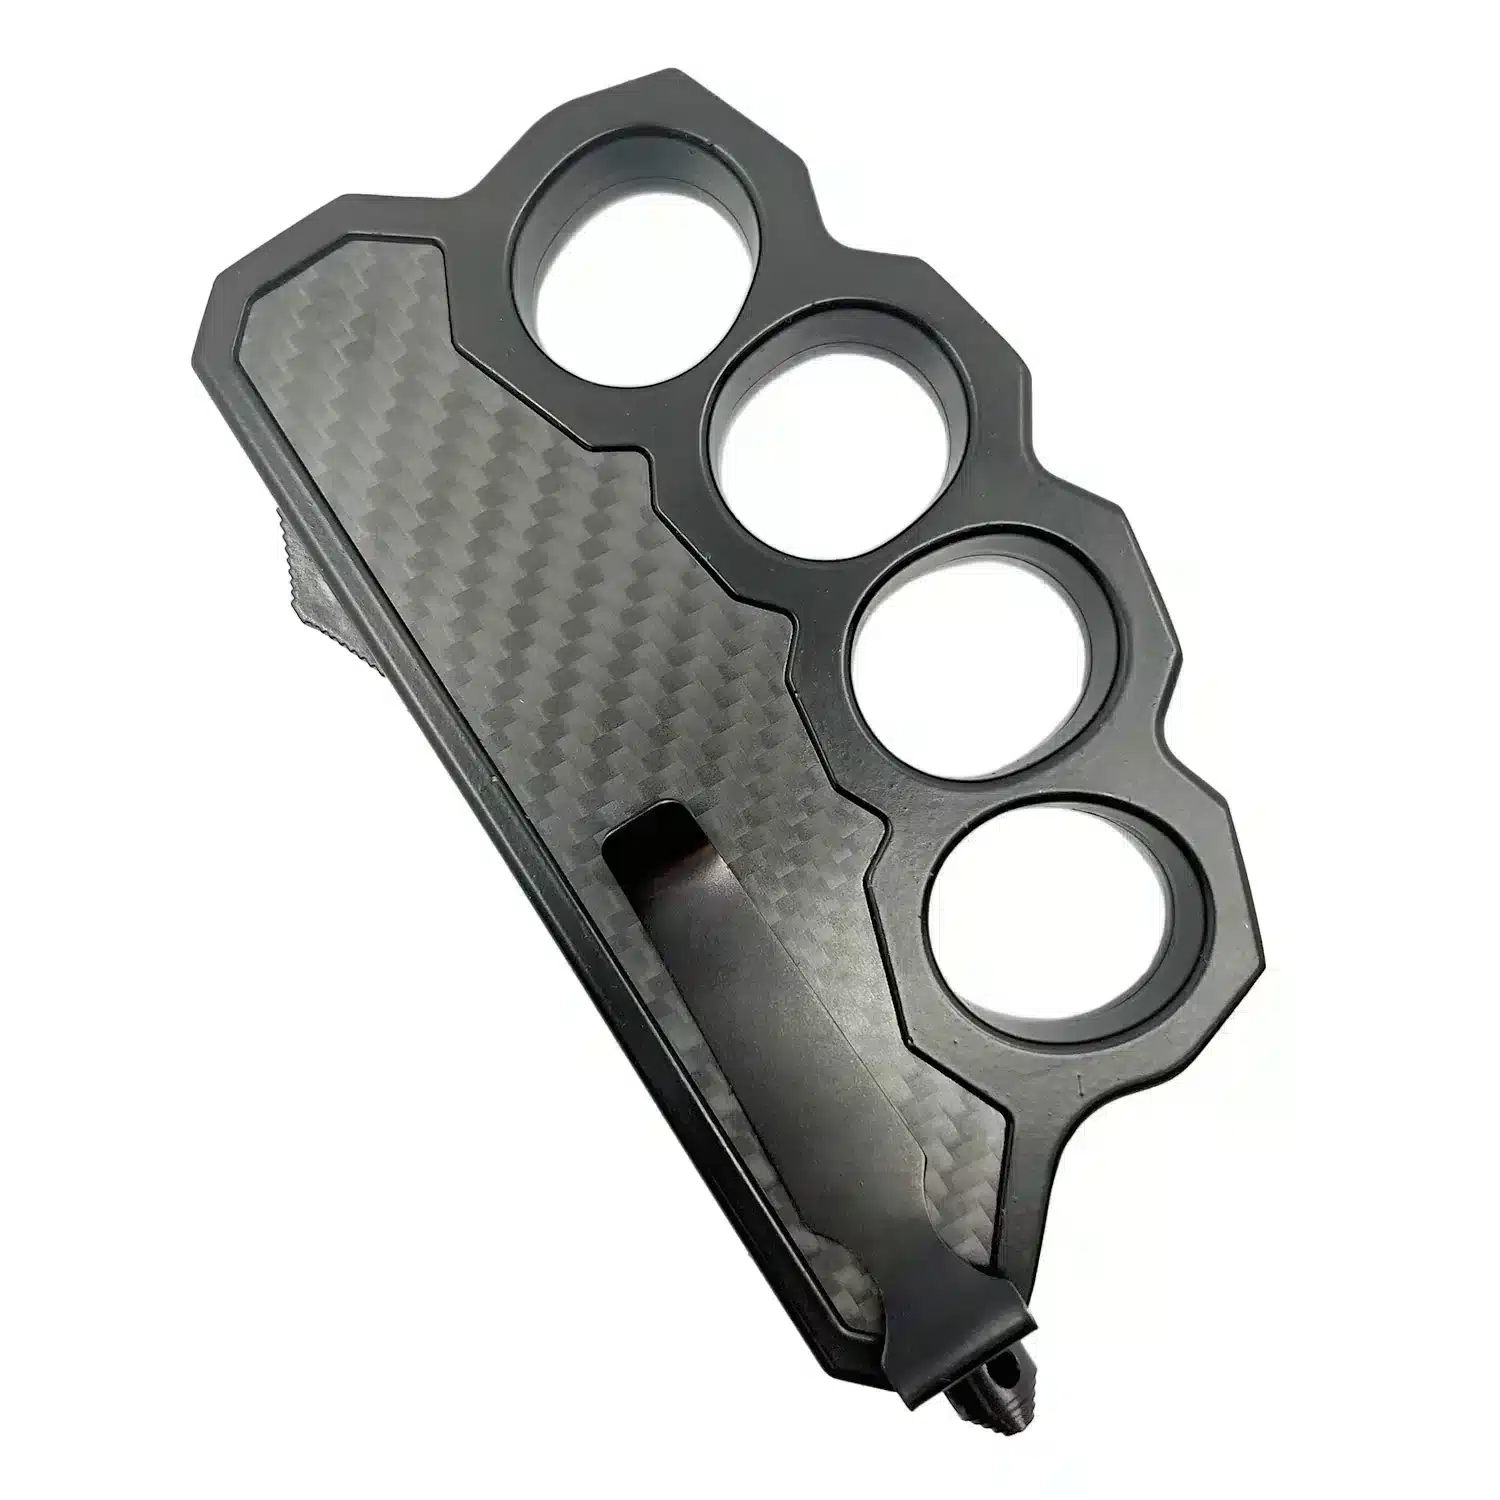 Ultimate OTF Knuckle Knife for Personal Protection